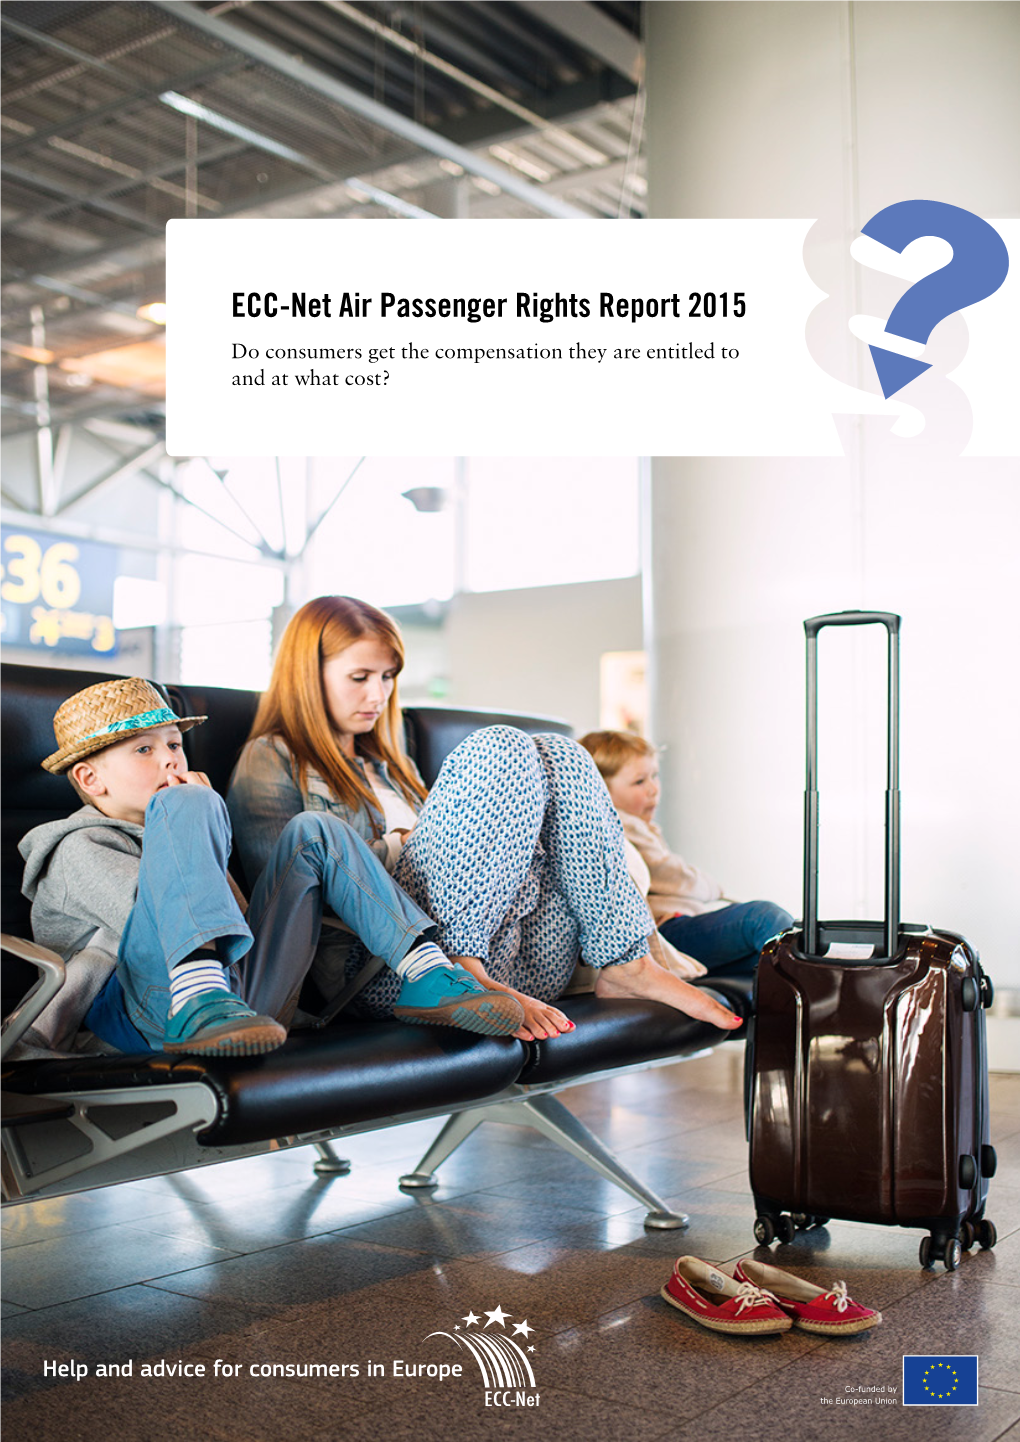 ECC-Net Air Passenger Rights Report 2015 Do Consumers Get the Compensation They Are Entitled to and at What Cost?